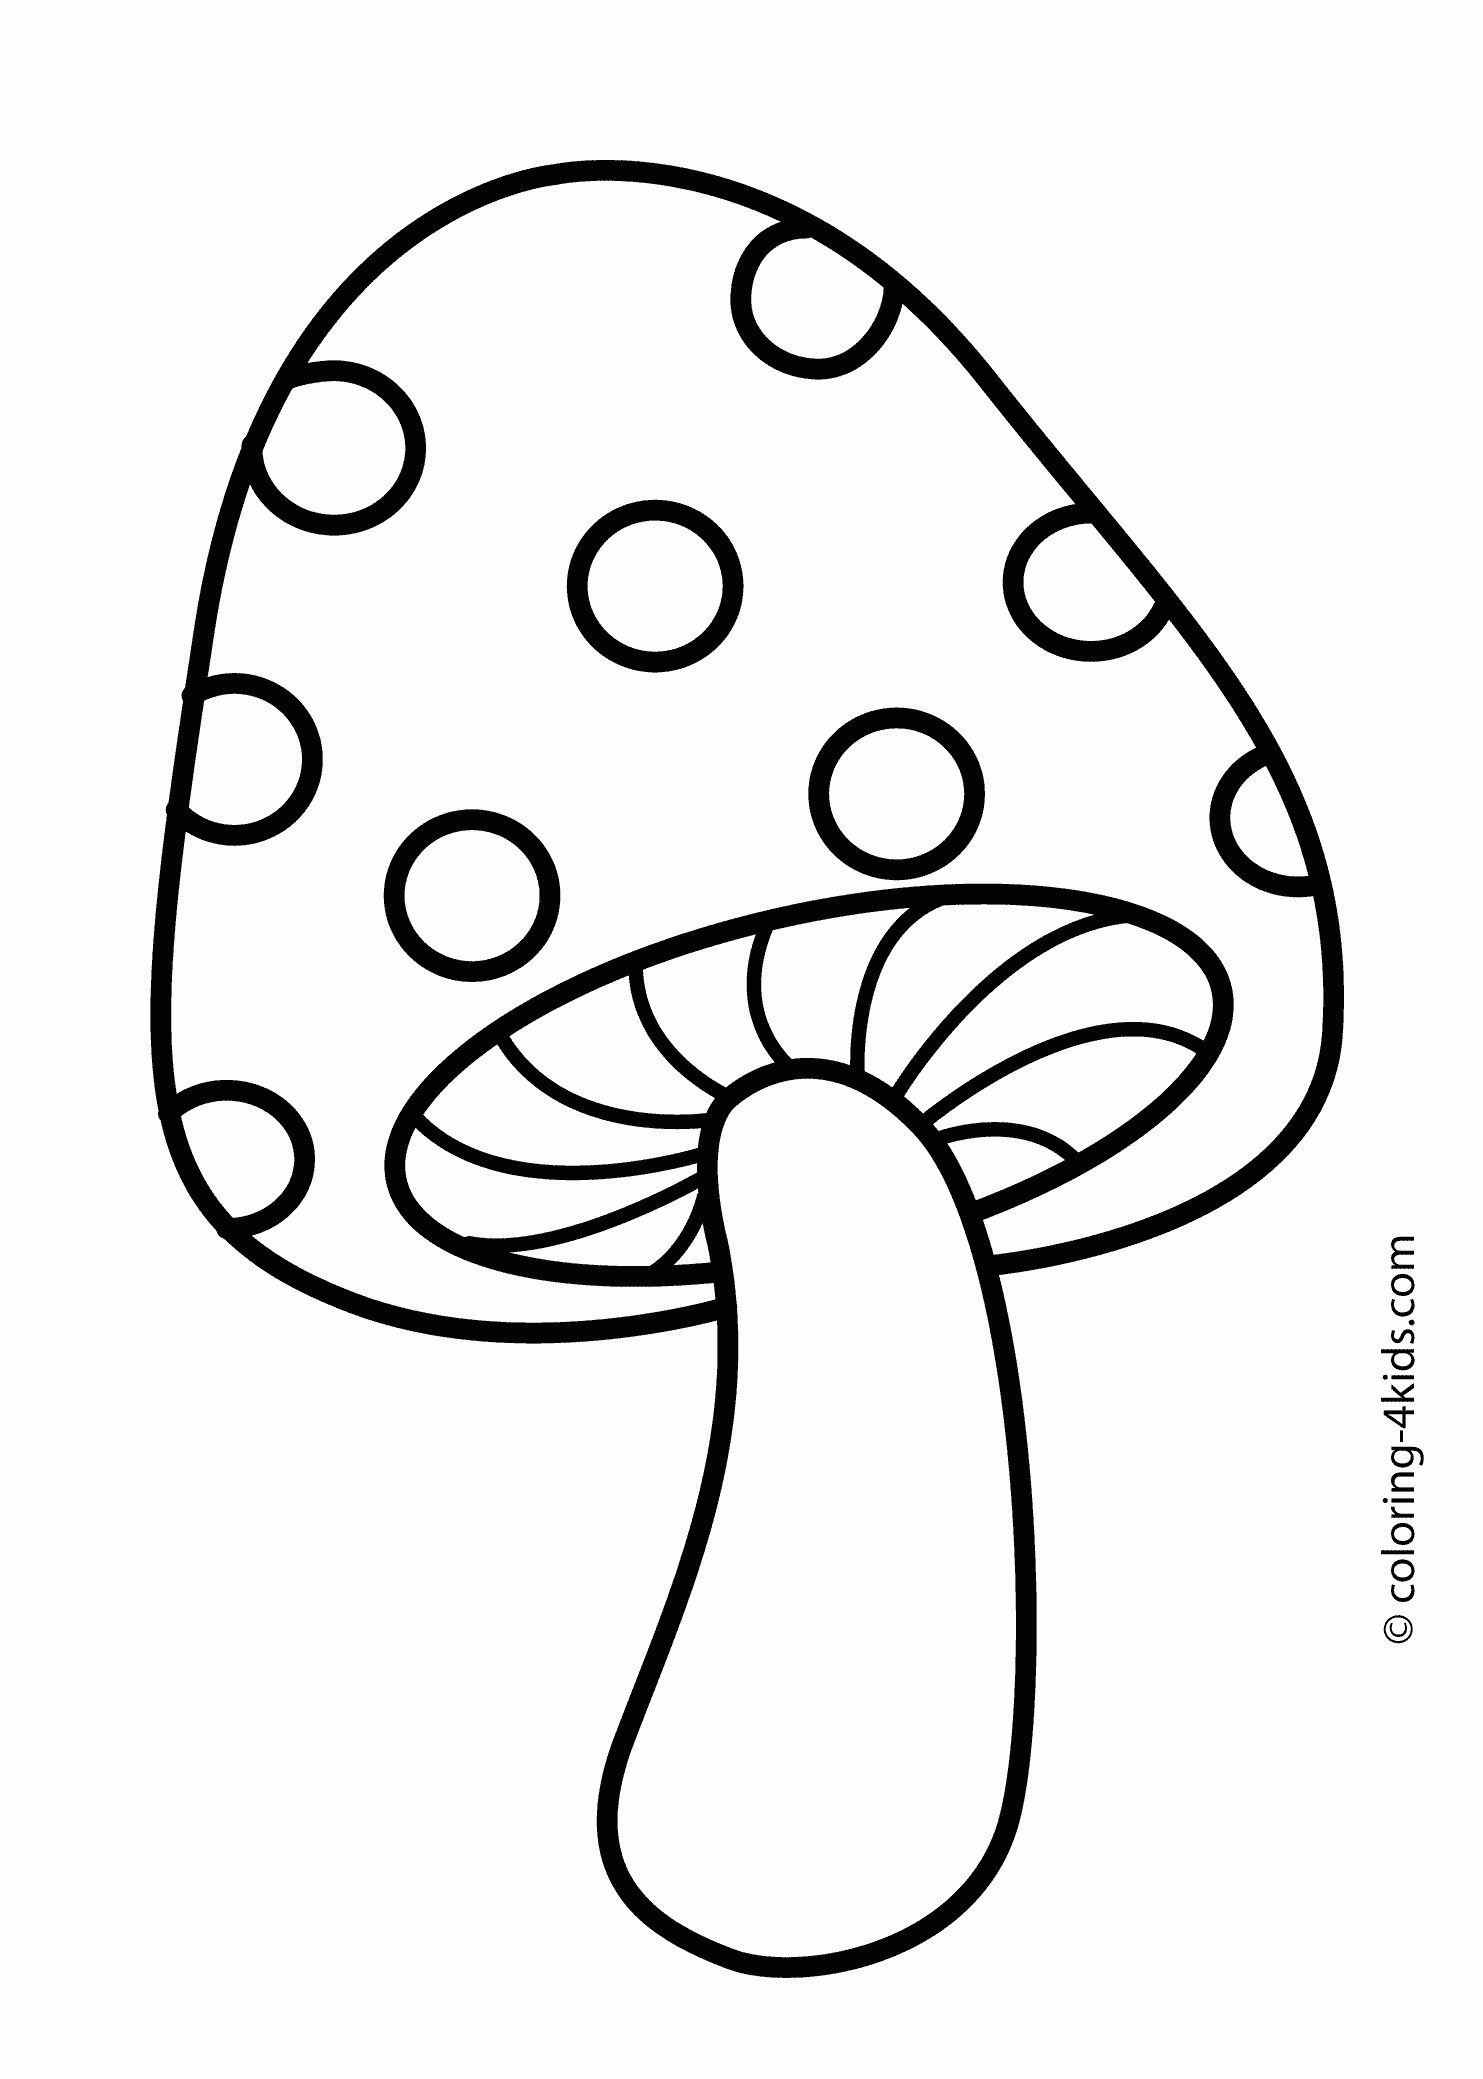 Psychedelic Mushrooms Coloring Page | Free Printable Coloring Pages